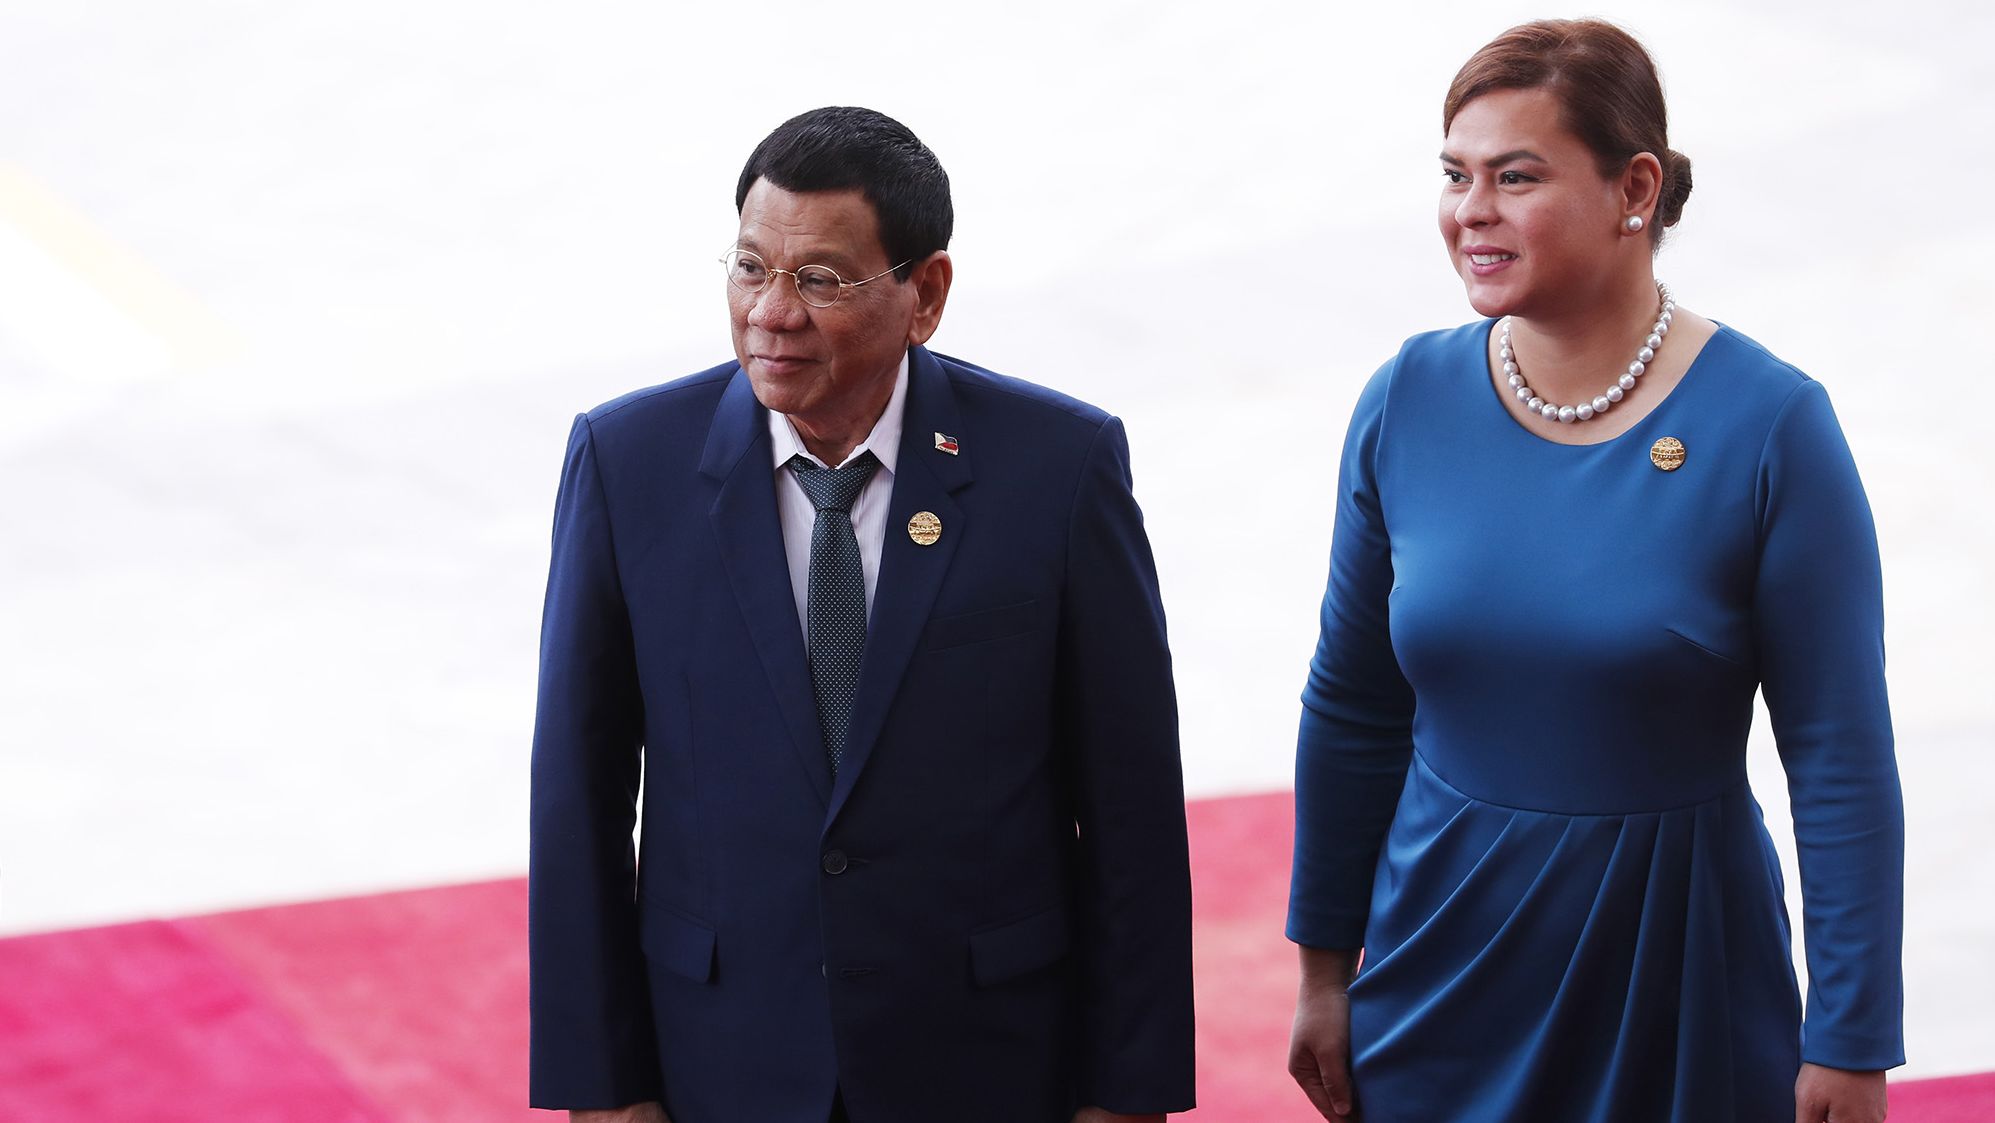 Philippines President Rodrigo Duterte and his daughter Sara at the Boao Forum for Asia Annual Conference 2018 in Boao, China, on April 10, 2018.